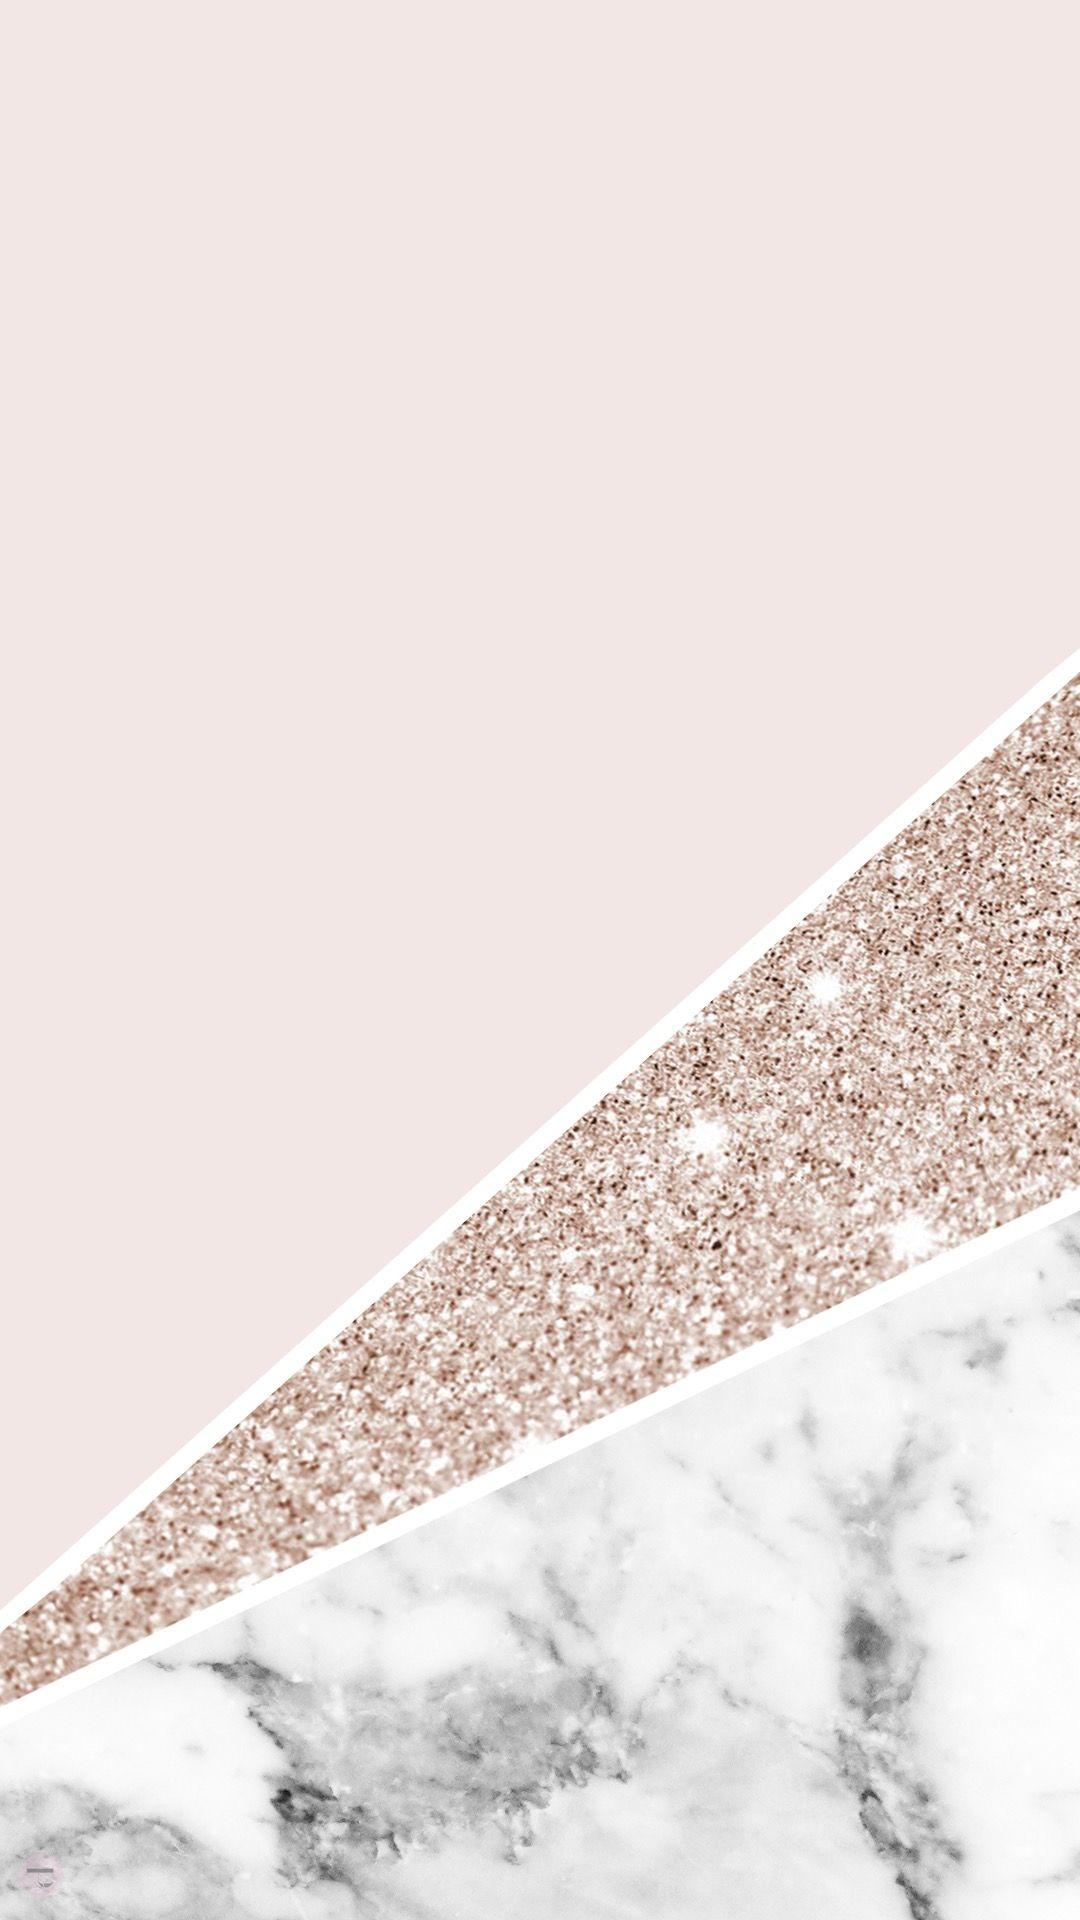 Glitter Iphone 5 Wallpapers Top Free Glitter Iphone 5